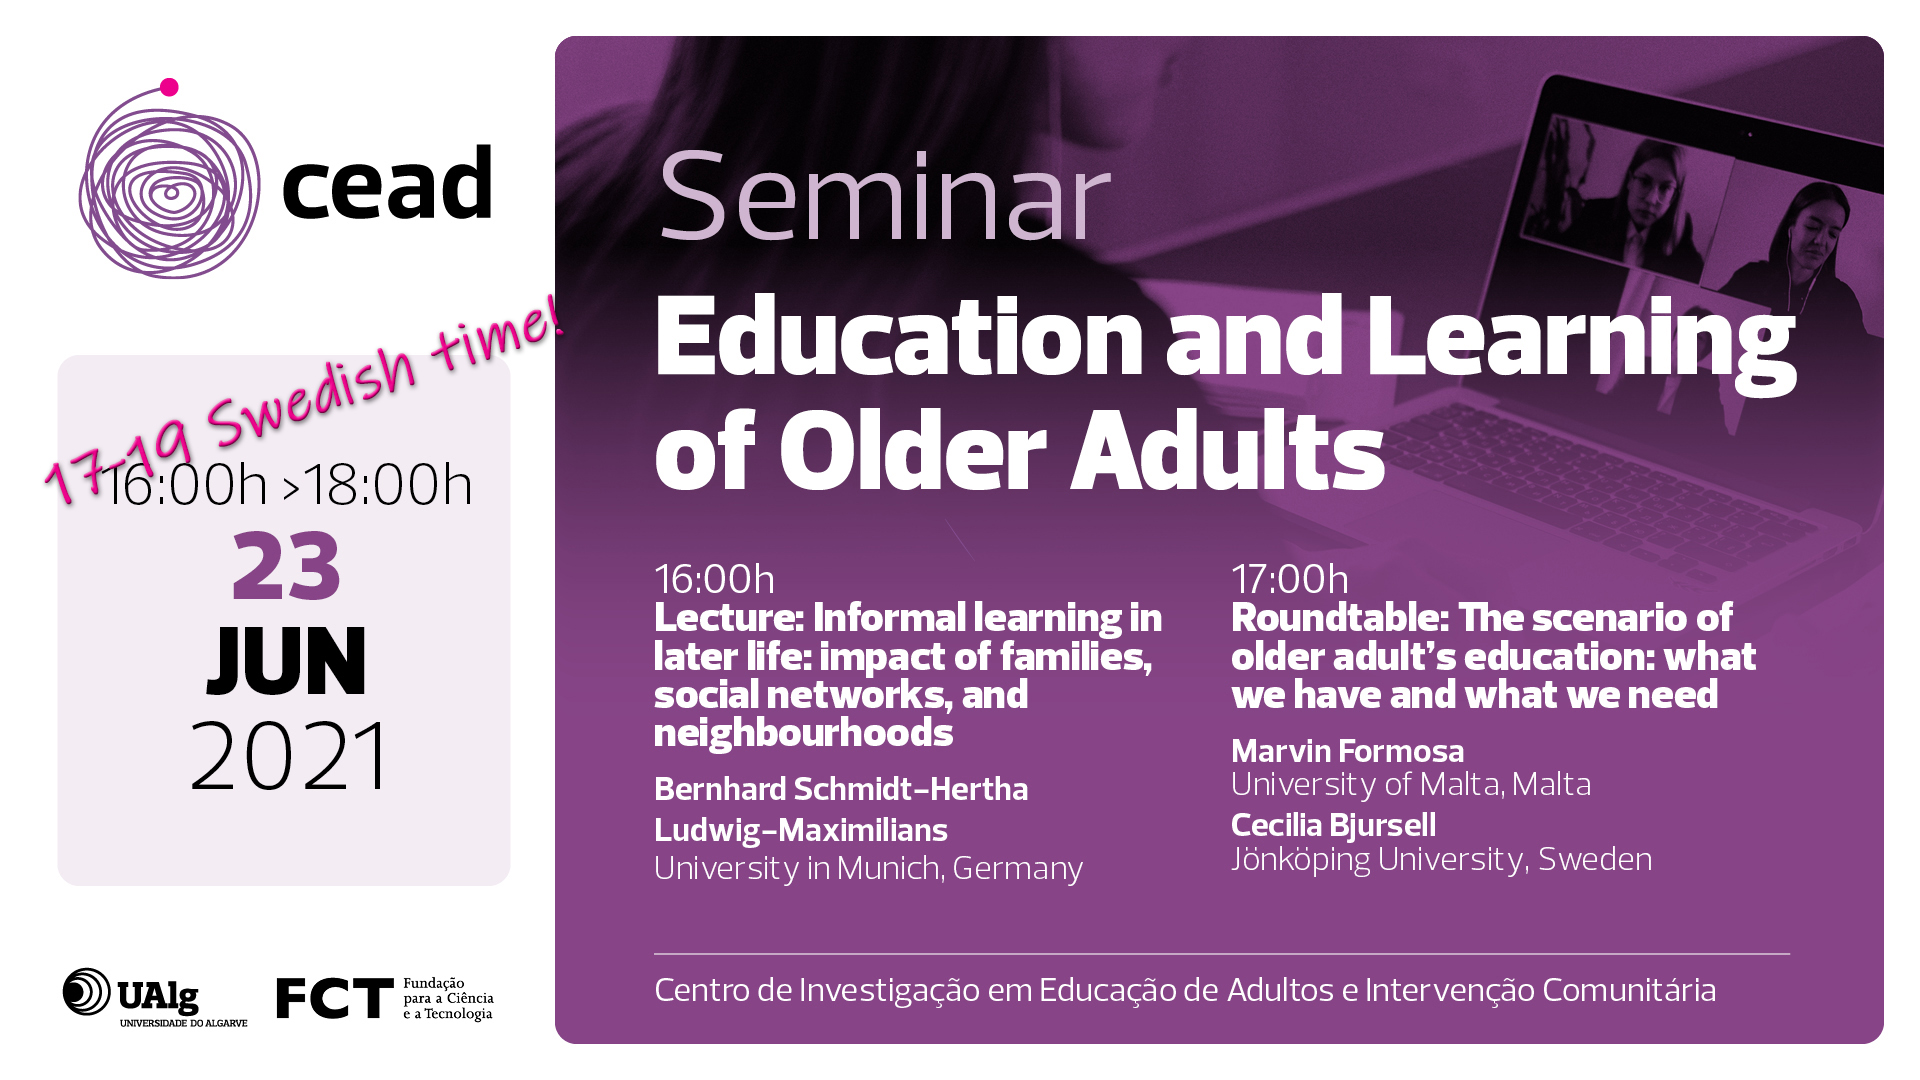 Seminar: Education and Learning of Older Adults. 23 June, 17-19 Swedish time. 17:00: Lecture: Informal learning in later life, impact of families, social networks and neighbourhoods. Bernhard Schmidt-Herta. 18:00: Roundtables: The scenario of older adult's education, what we have and what we need. Marvin Formosa and Cecilia Bjursell.